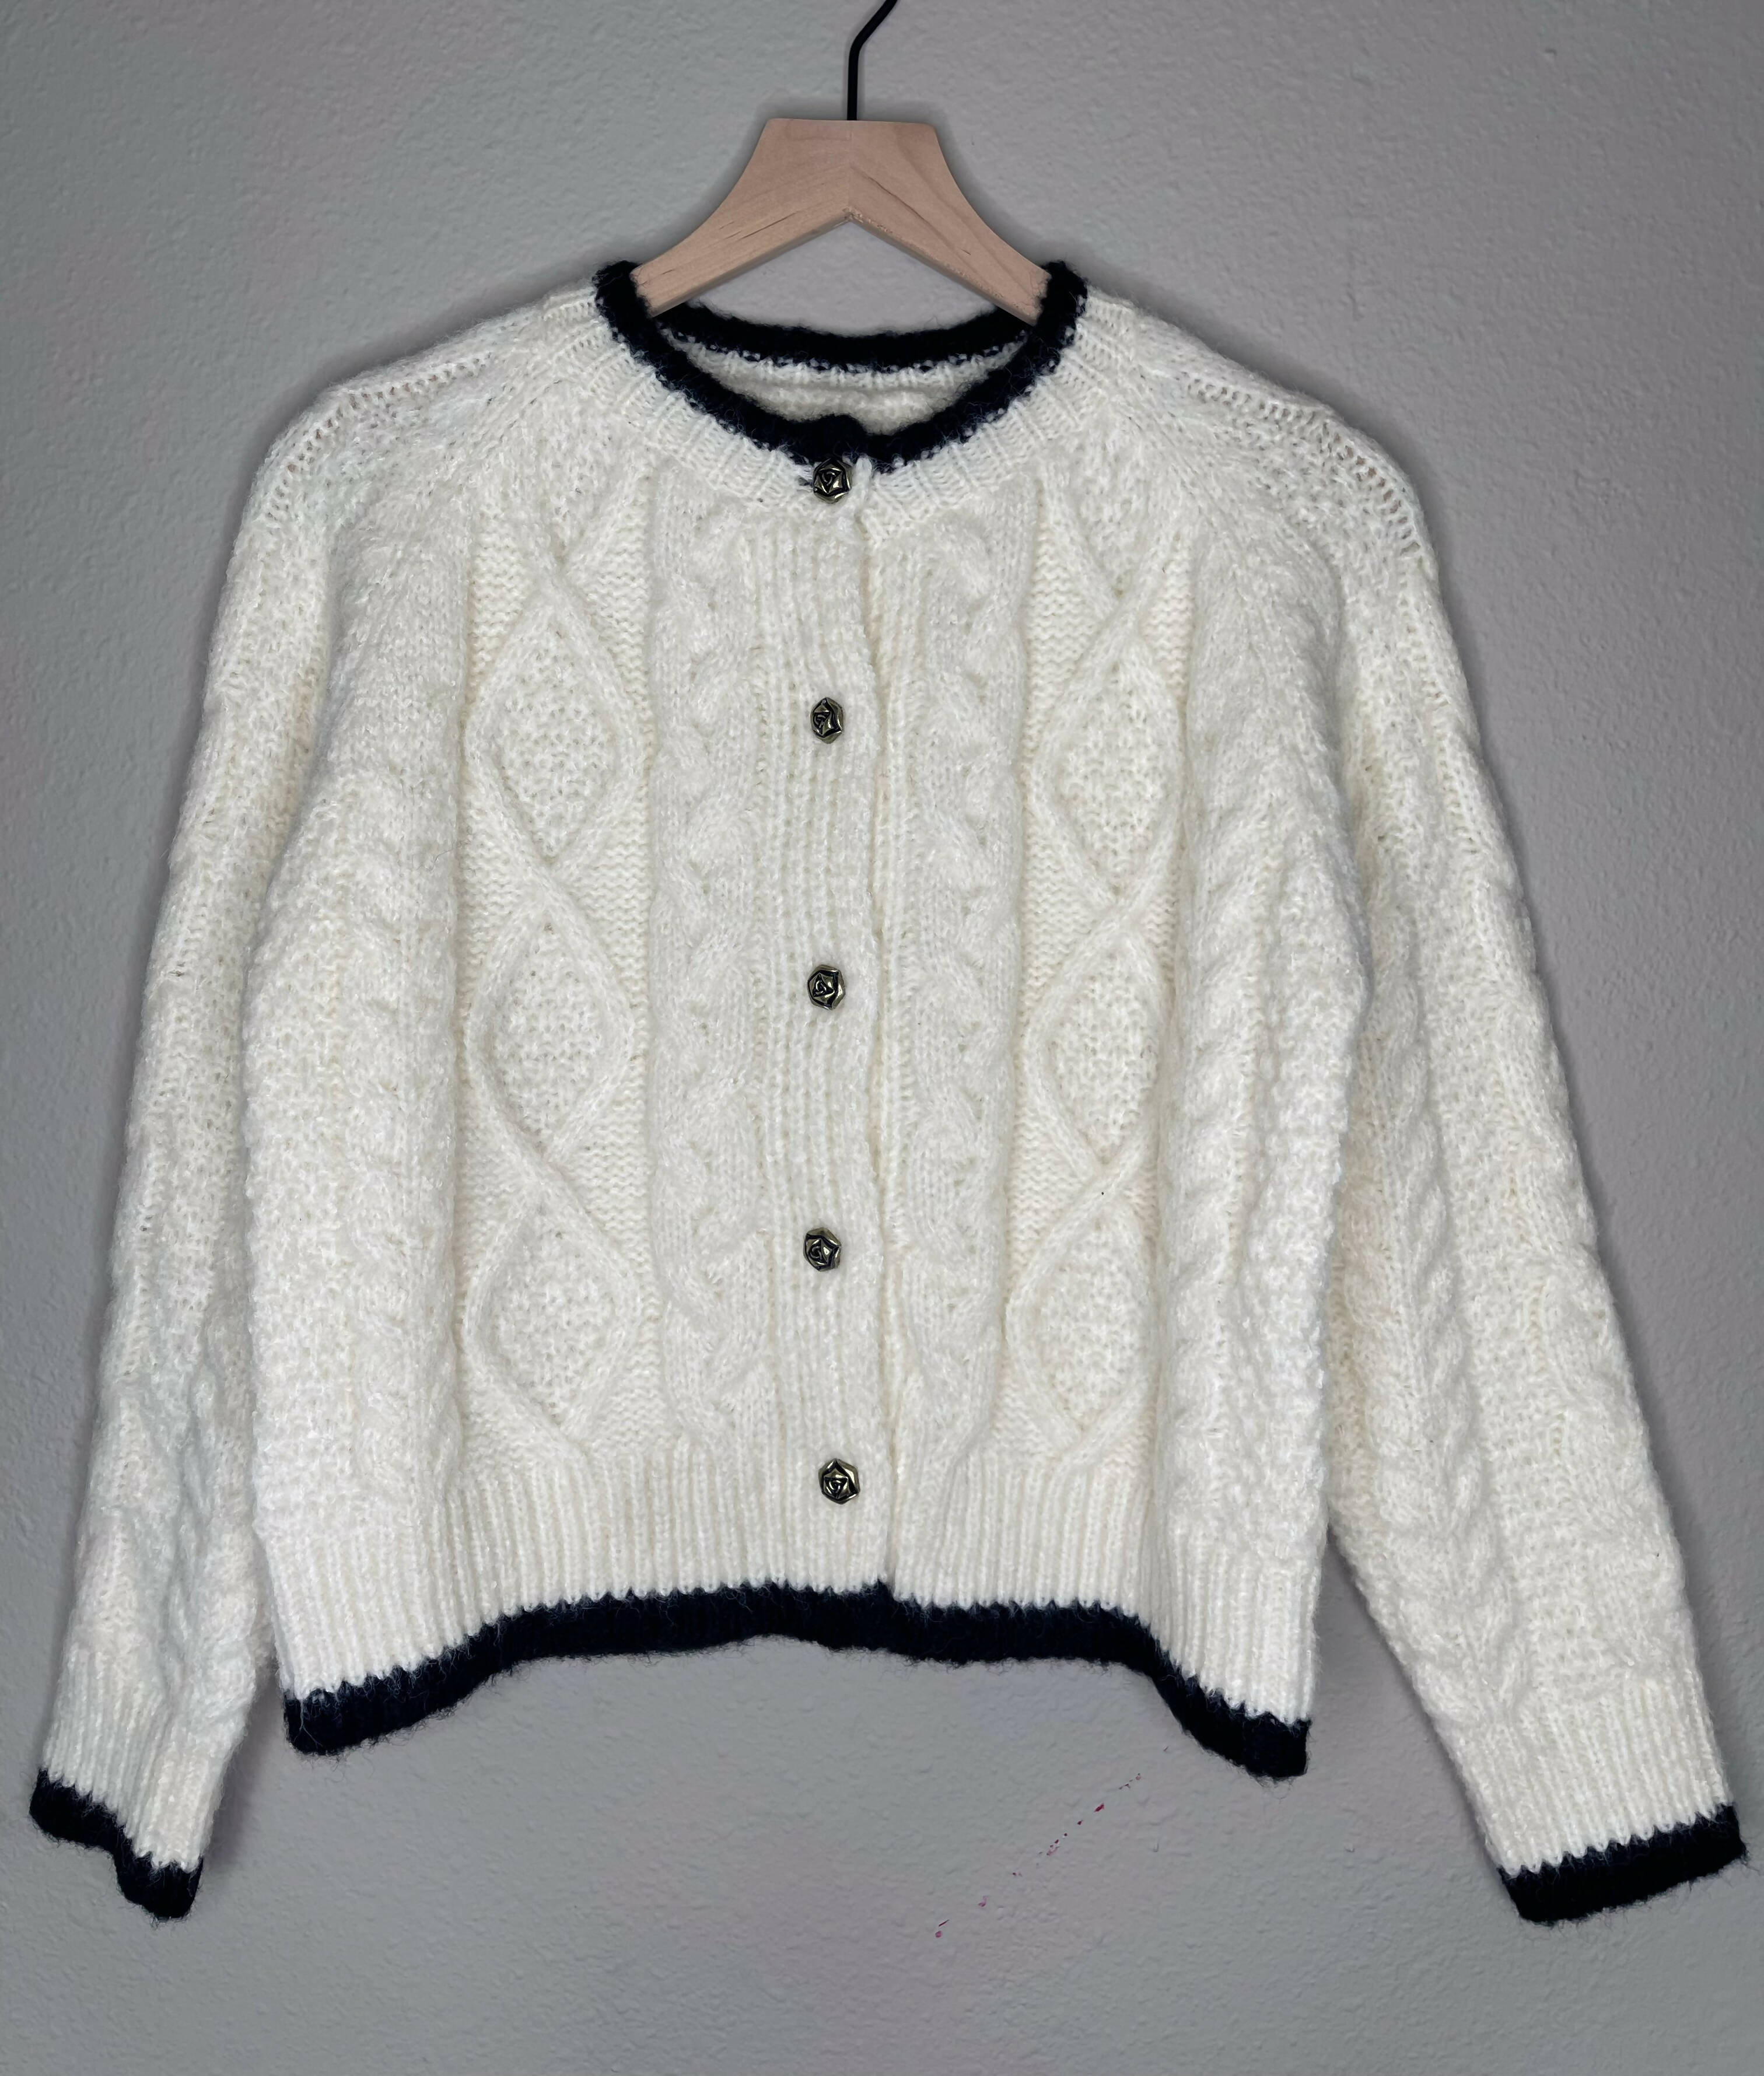 Super Soft Cable Knit Cardigan (Ivory)